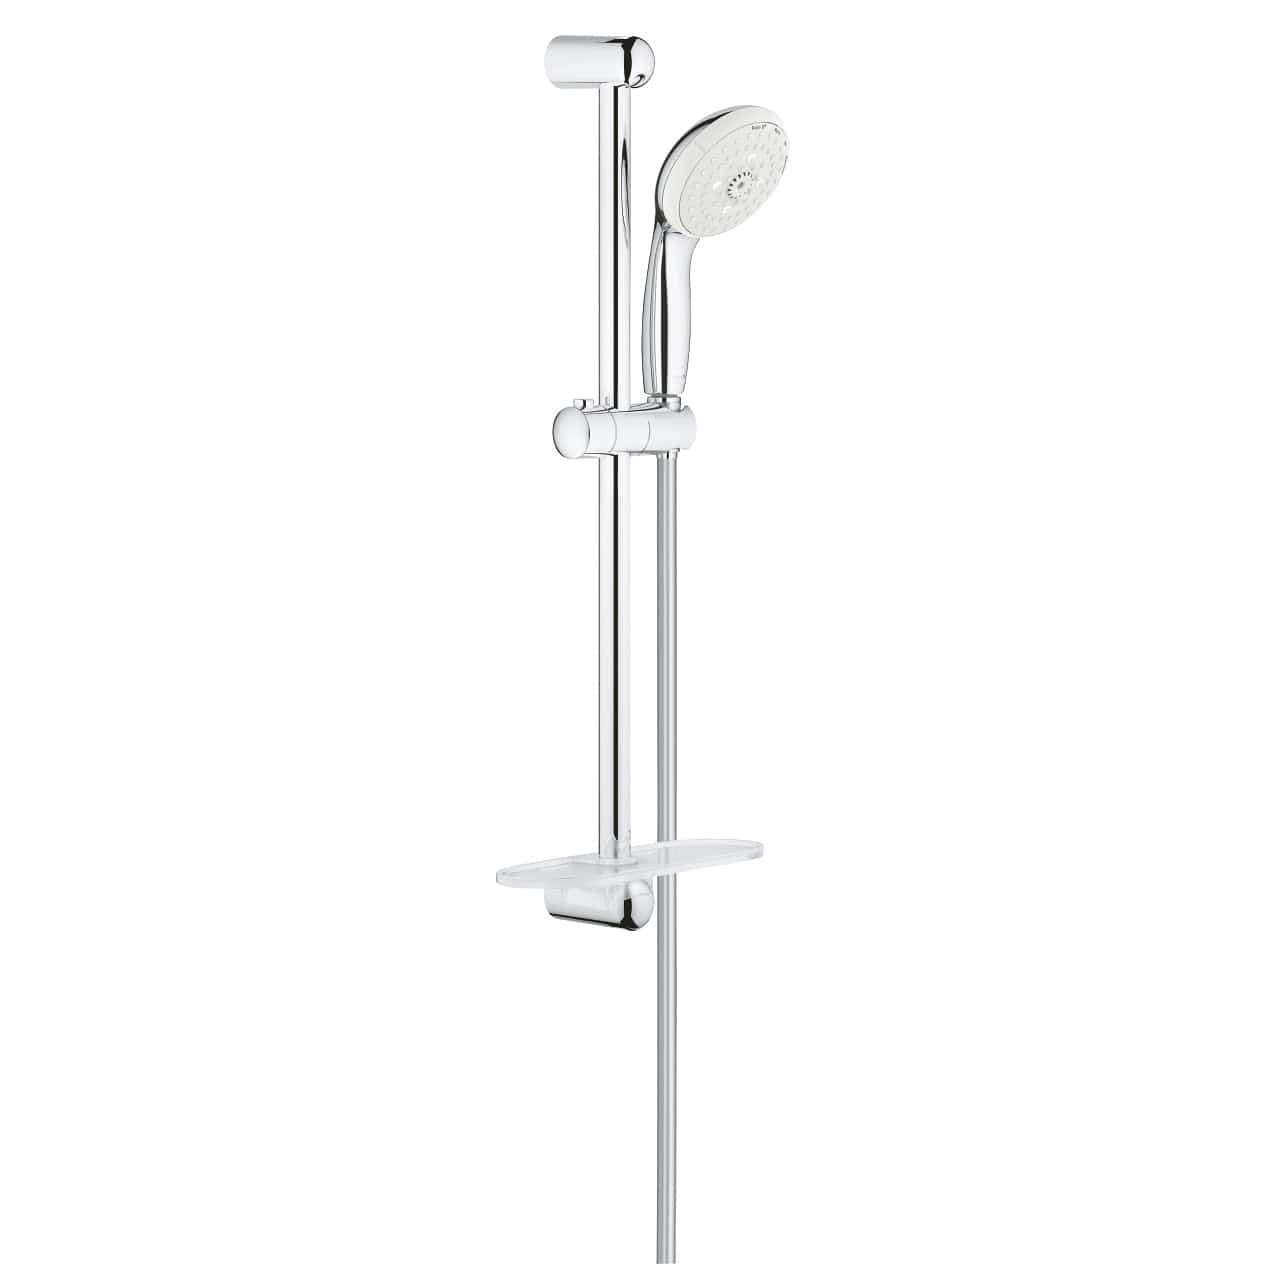 Grohe Tempesta 100 Shower Rail Set with 4 Sprays, Chrome | Supply Master | Accra, Ghana Shower Set Buy Tools hardware Building materials